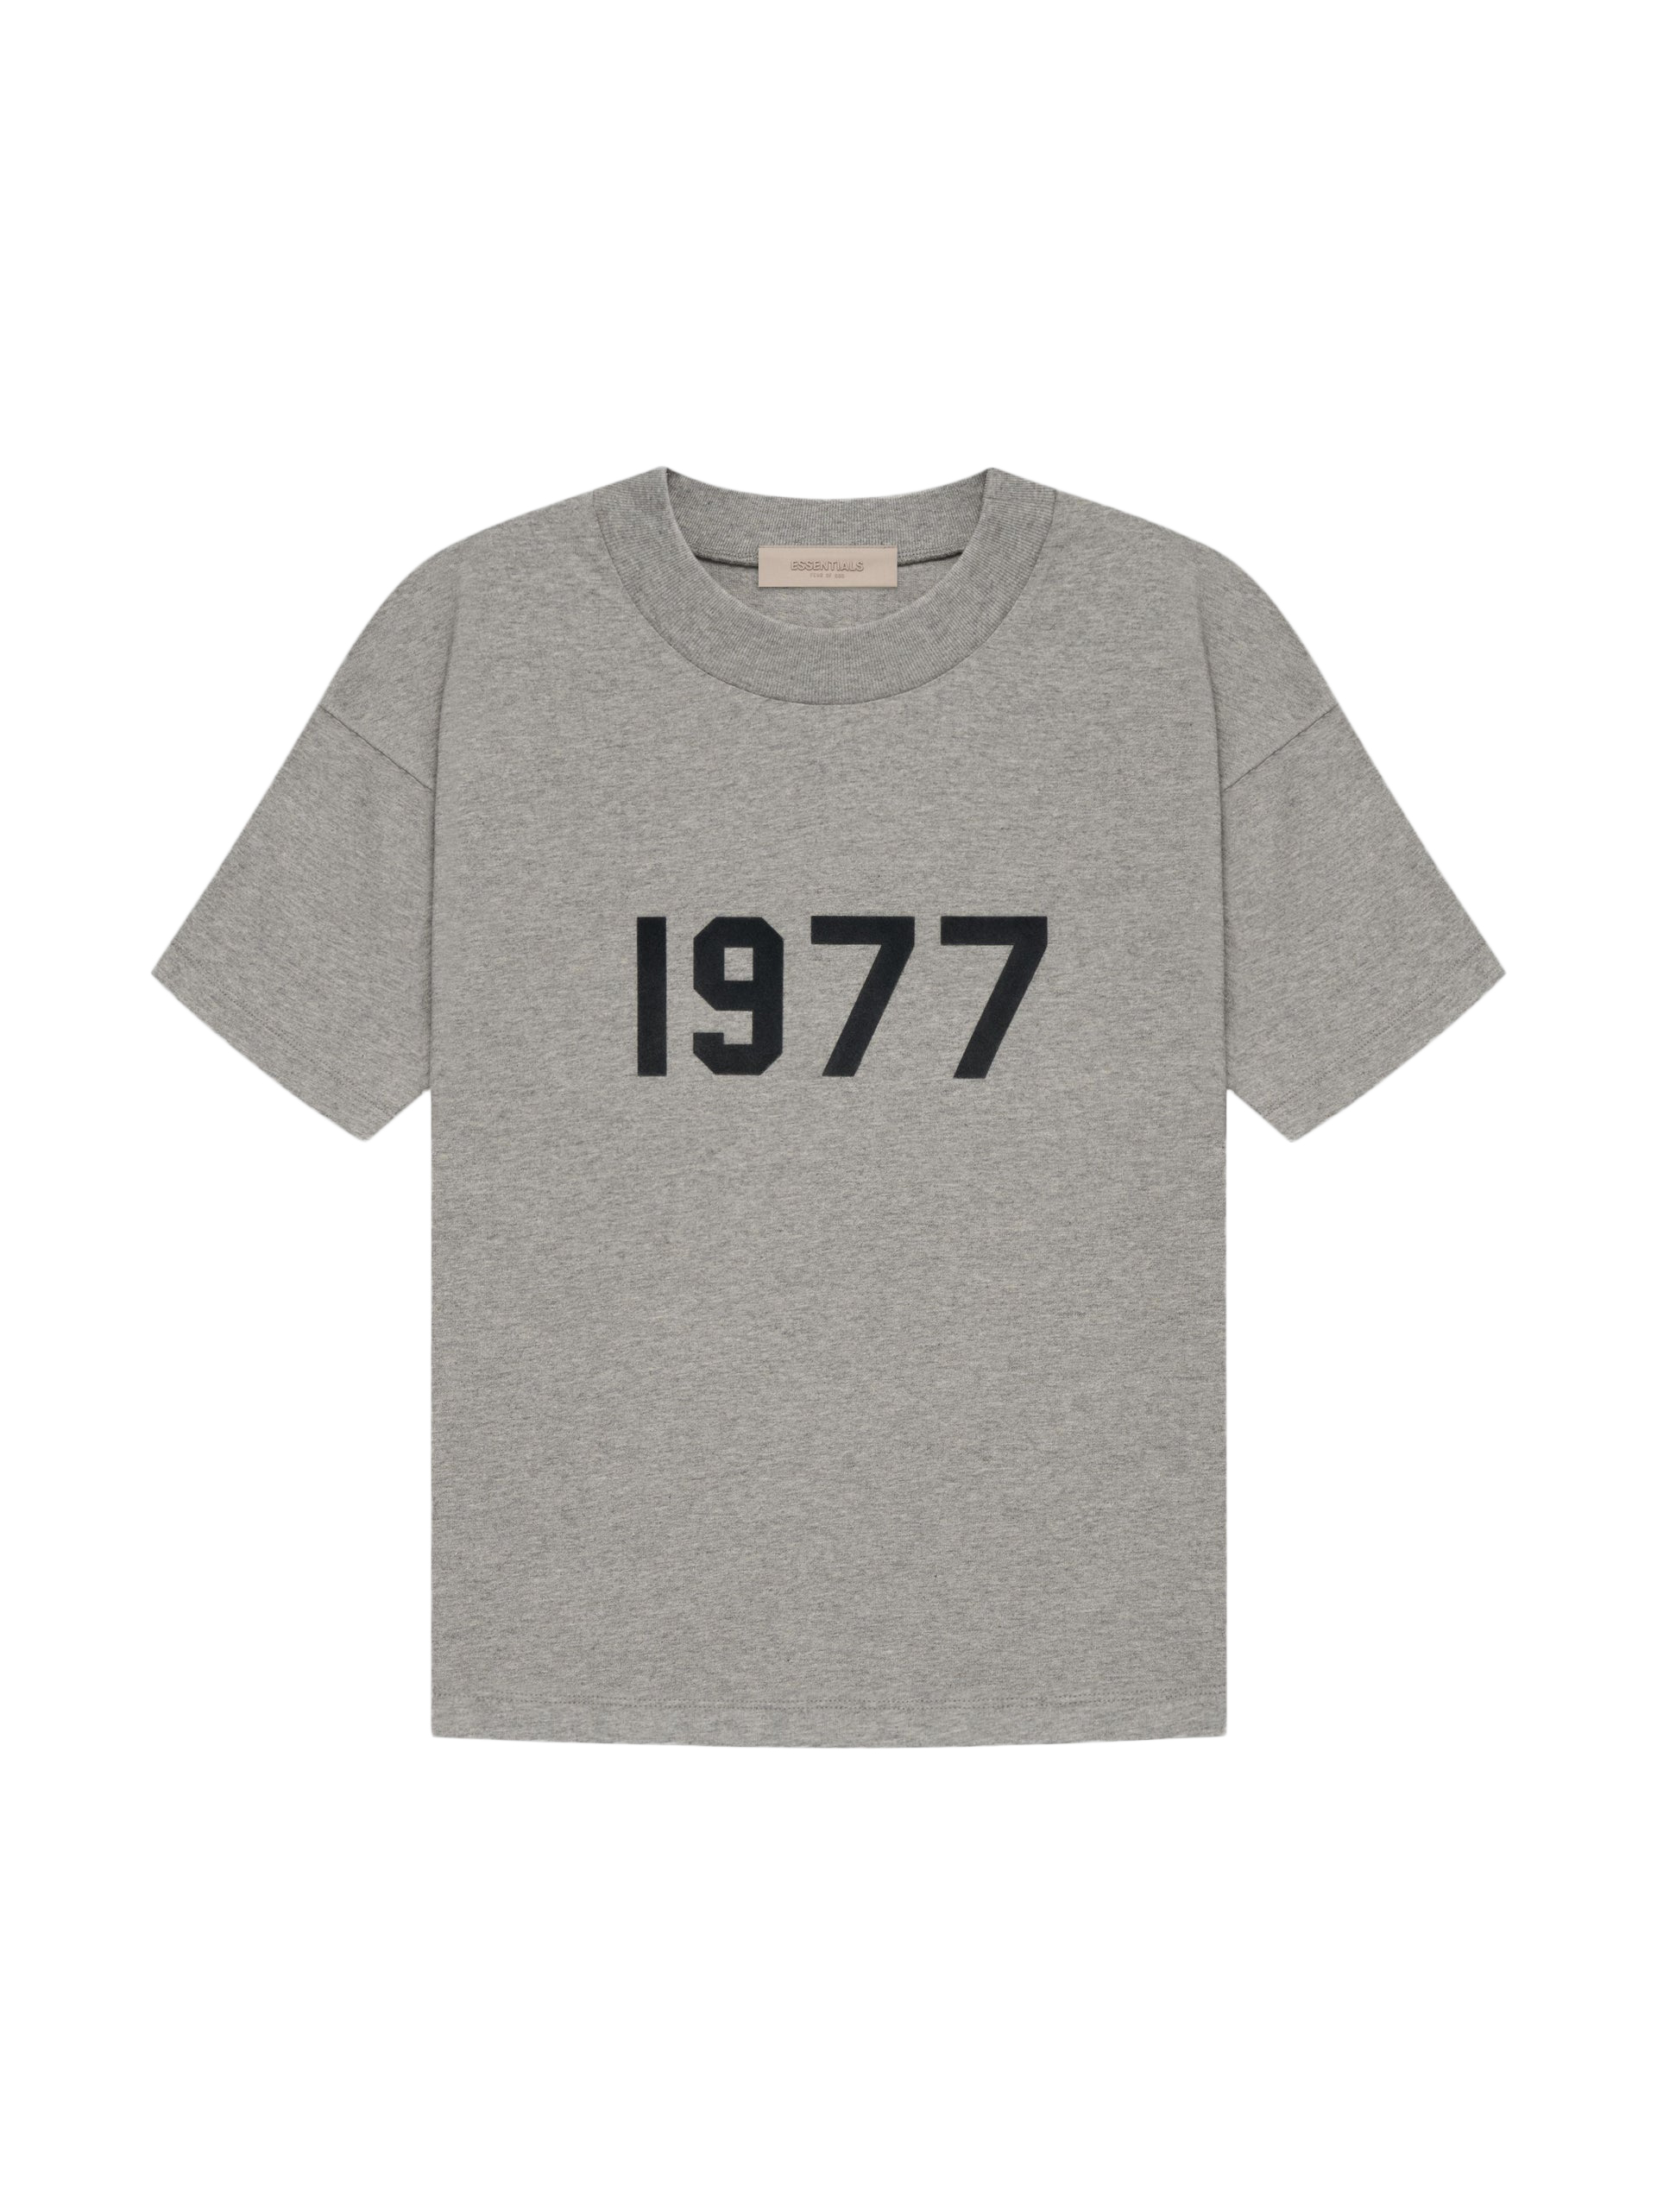 Fear of God Essentials 1977 Tシャツ トップス Tシャツ/カットソー